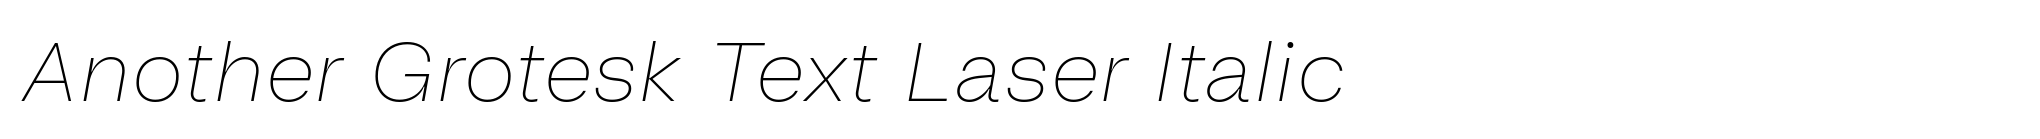 Another Grotesk Text Laser Italic image